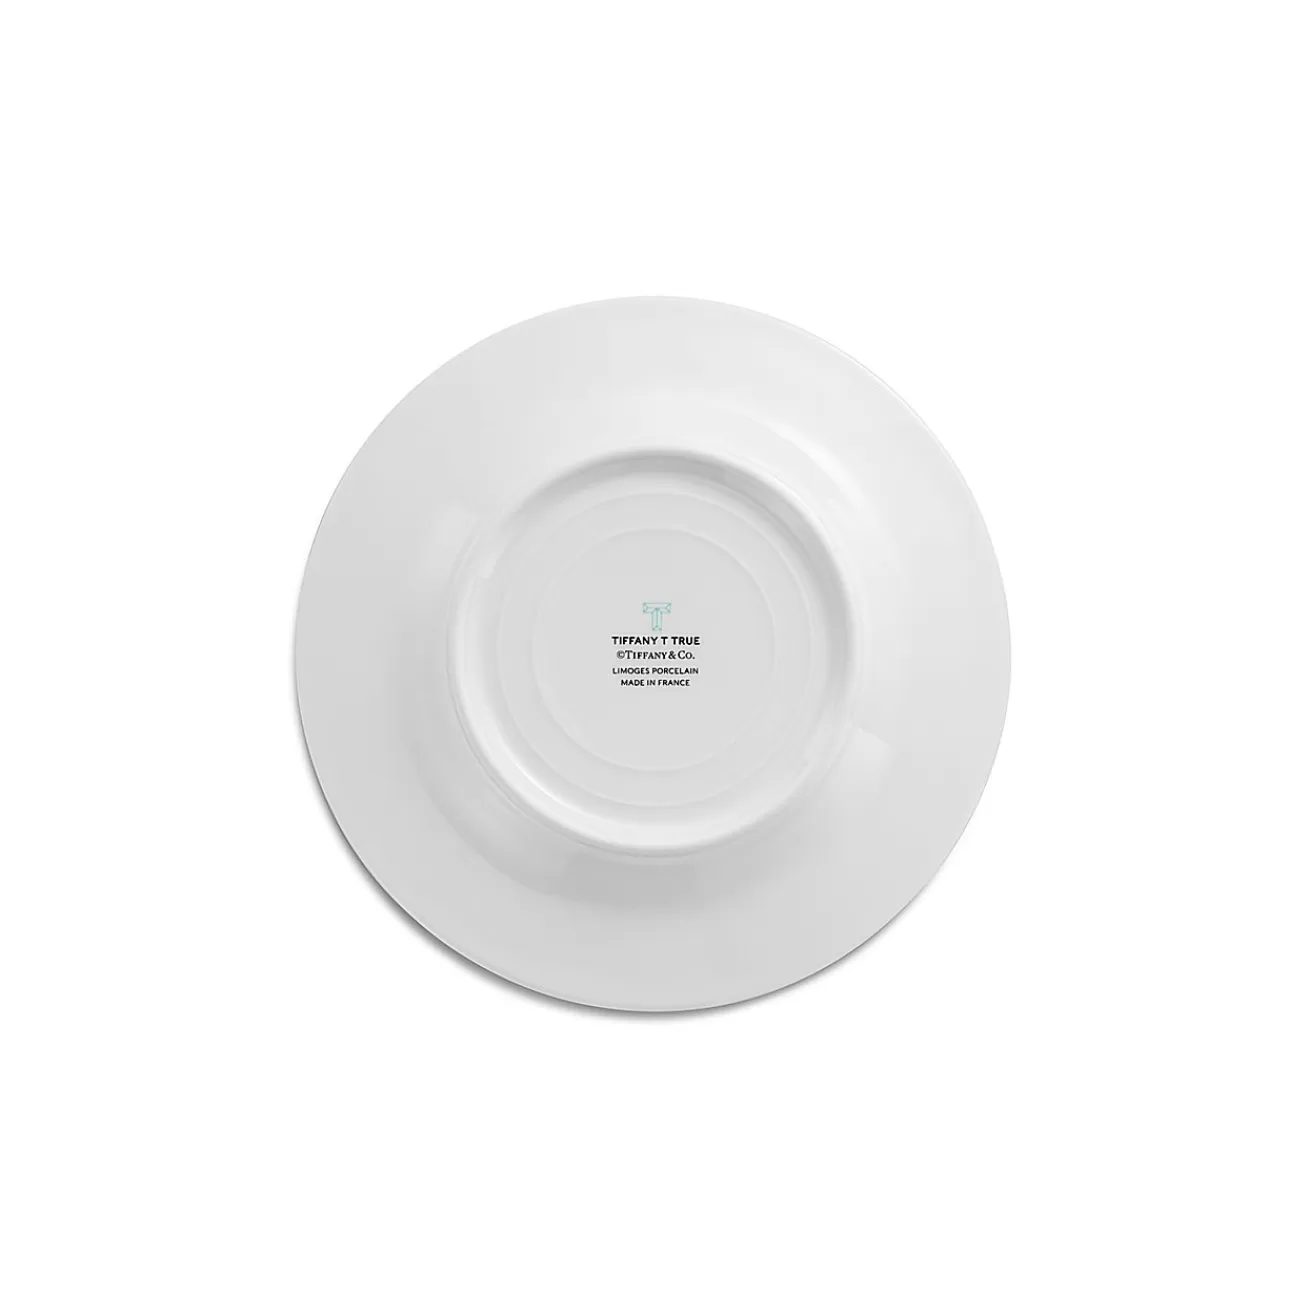 Tiffany & Co. Tiffany T True Bread and Butter Plate with a Hand-painted Platinum Rim | ^ Tableware